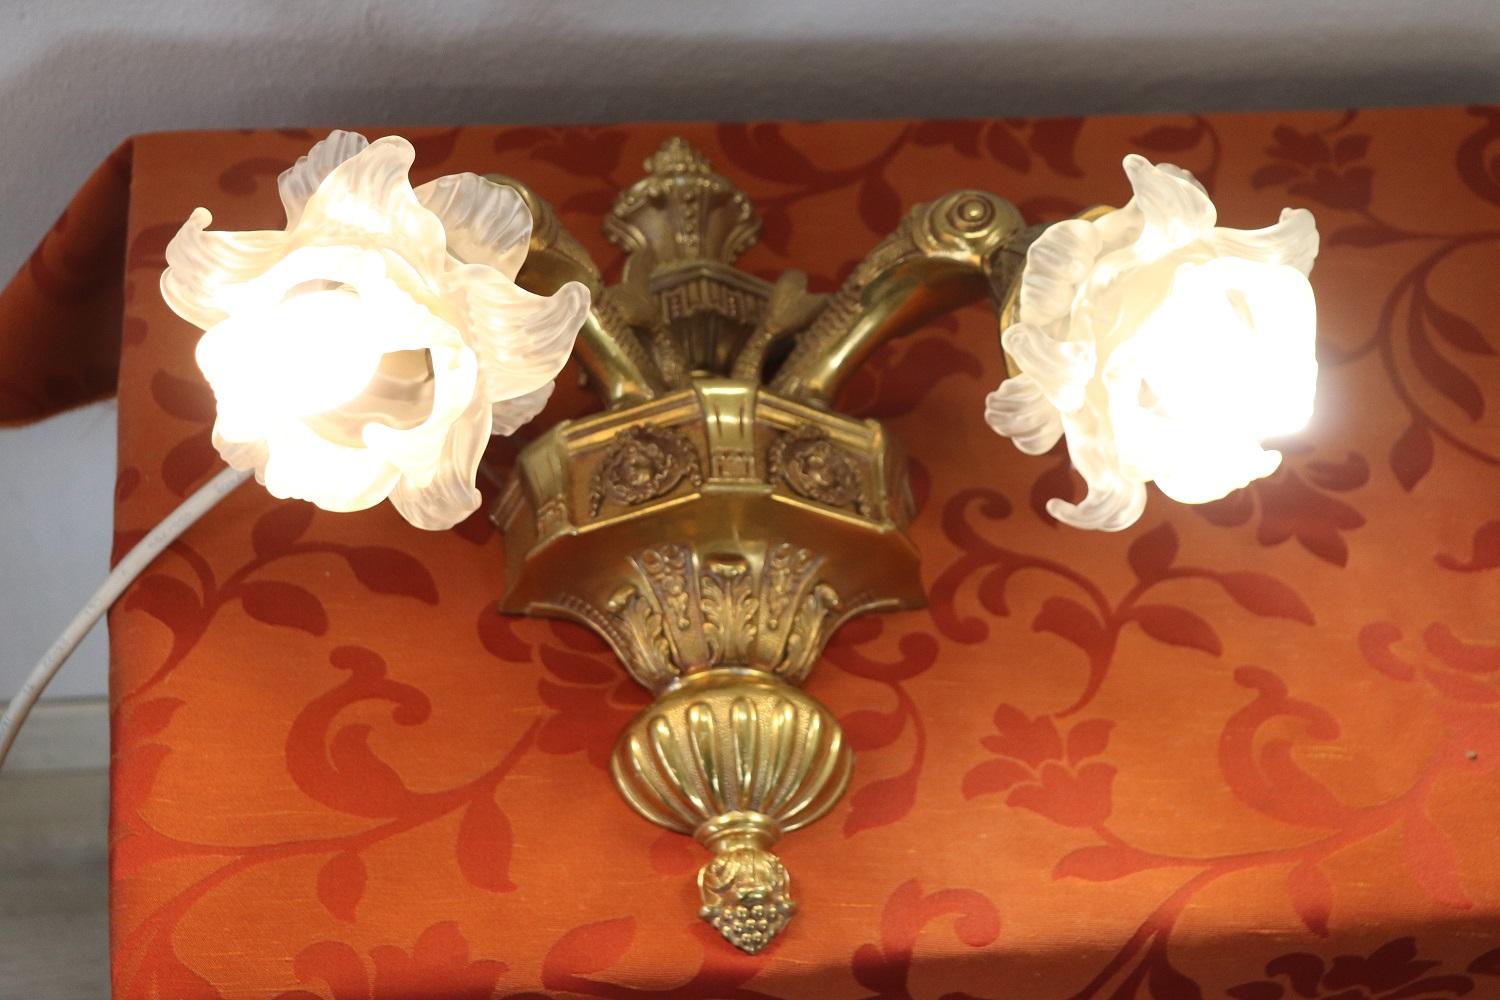 Beautiful and refined Italian early 20th century pair of wall lights or sconces two lights each. Made of golden bronze. The bronze is finely chiseled with elaborate decoration. Large and beautiful glass flowers hide the bulb. Very decorative perfect